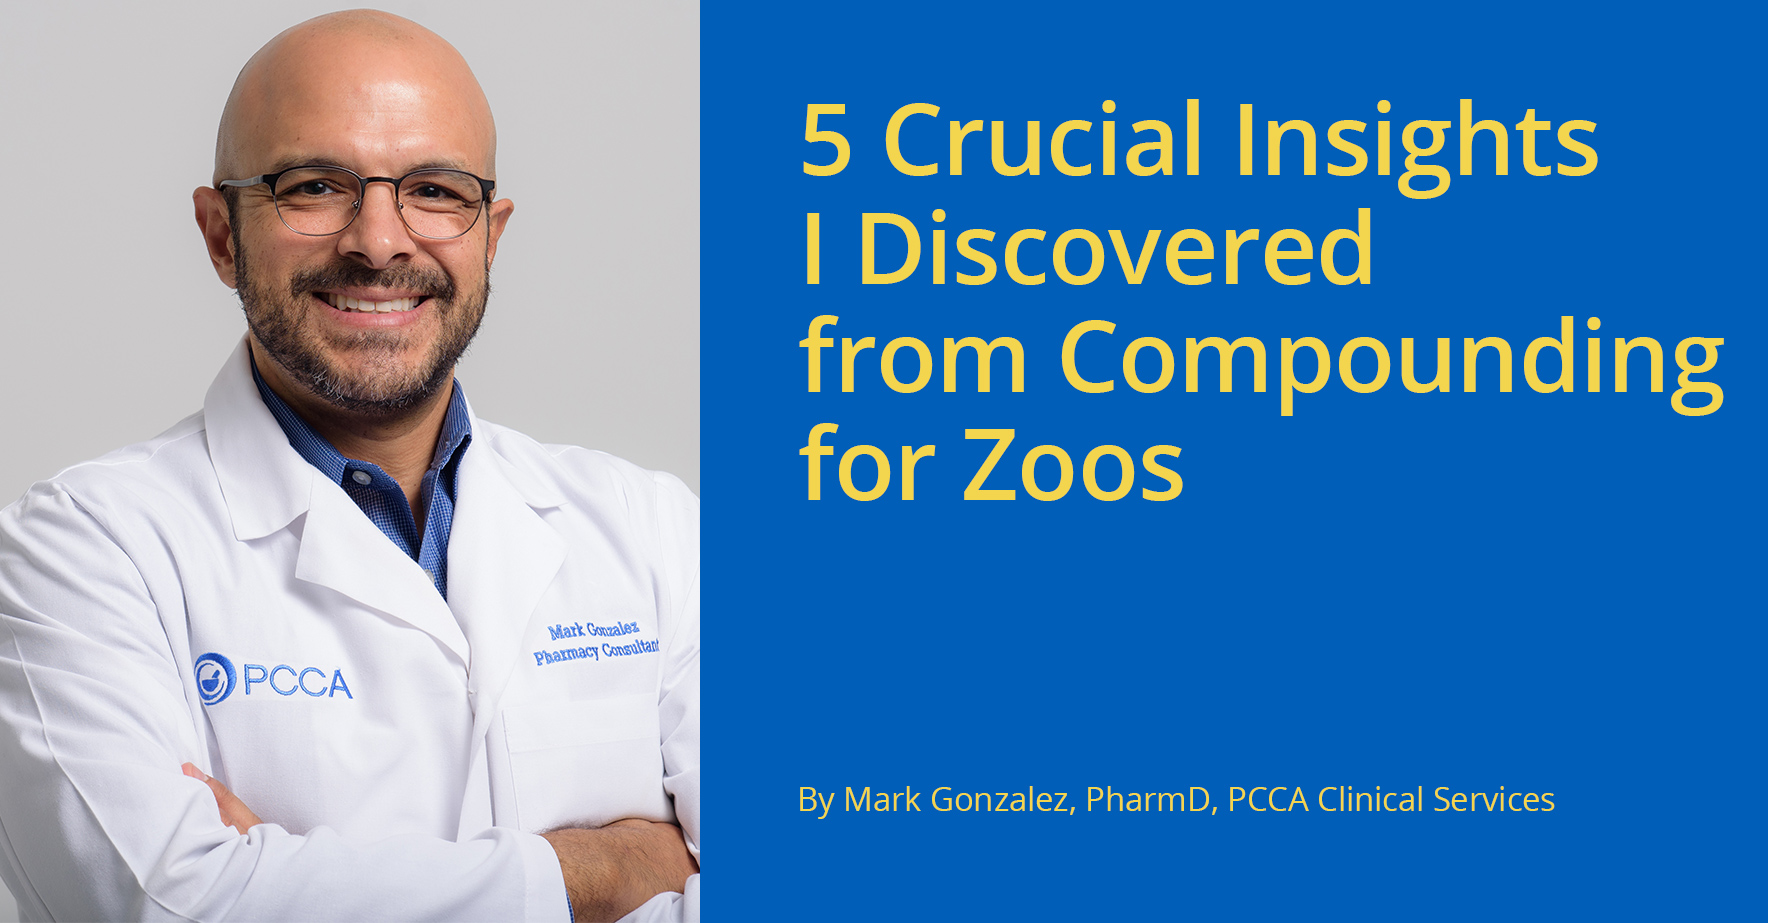 5_crucial_Insights_i_discovered_from_compounding_for_zoos.jpg.